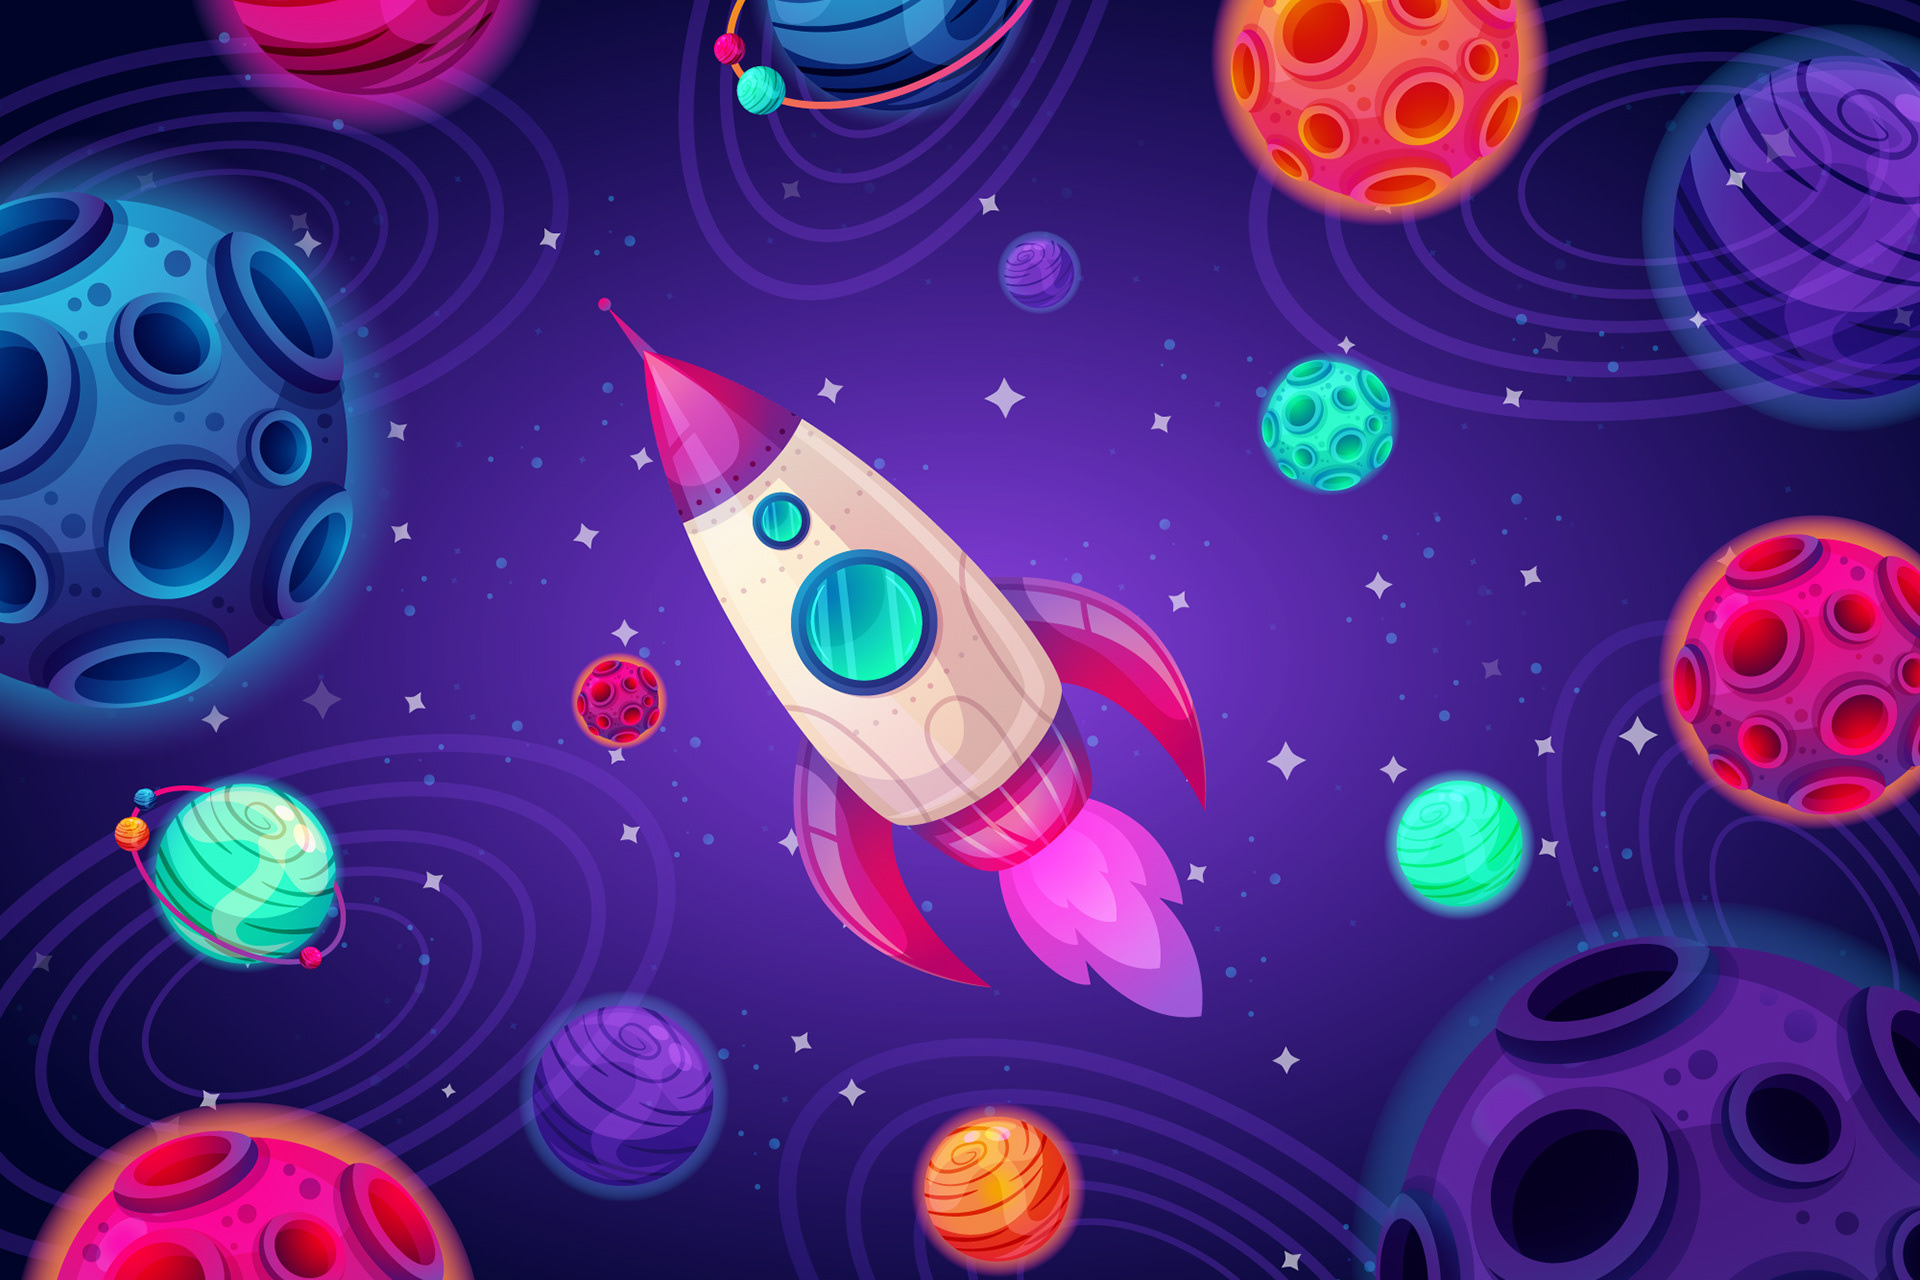 Space rockets Planets galaxy stars vector art flat design character on rock...